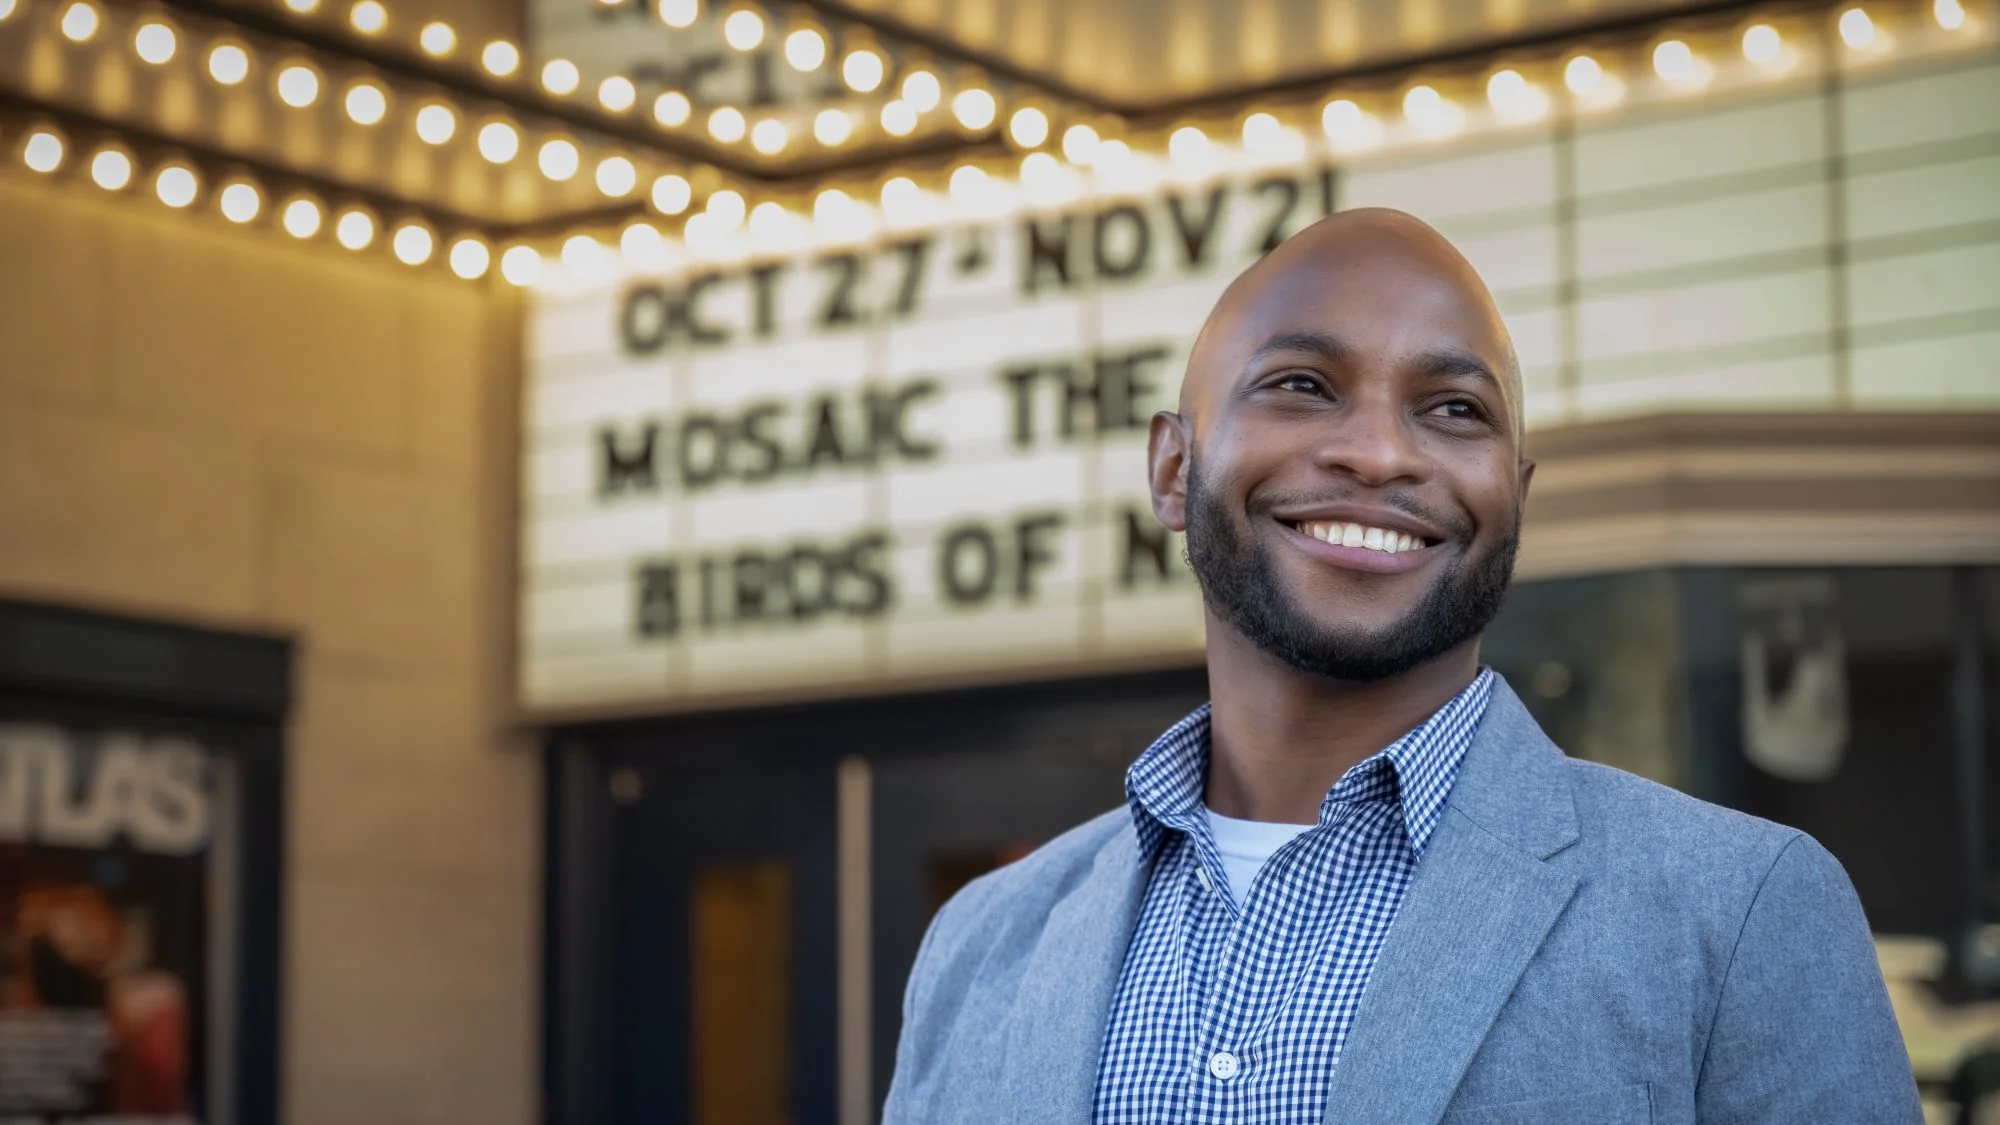 A man with a well-groomed beard smiles in front of a theater marquee.